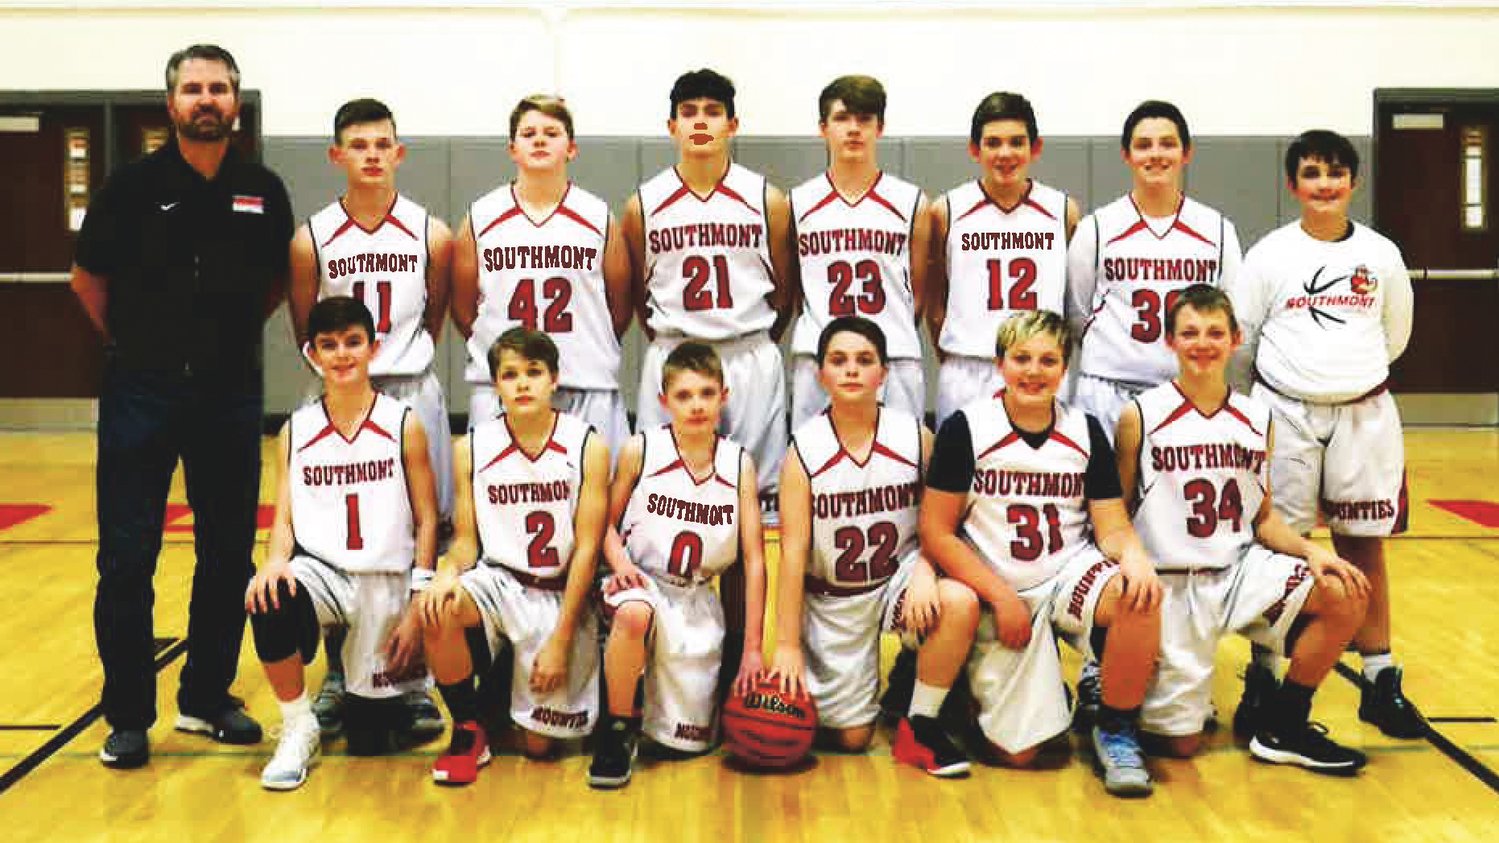 The Southmont junior high seventh-grade boys' basketball team was crowned the Montgomery County champion with a 64-12 win over Crawfordsville and 36-26 win over Northridge. The Mounties finished the season 15-5 and won tournament championships at Covington and Cloverdale..Pictured Above: Front Row L-R Vince Reimondo, Evan Watson, Hunter McArthur, Kyle Sobelewski, Jackson Bushong, and Tyler Petroski. Back Row L-R Coach Rob Reimondo, Dylan Howell, Ty McGaughey, Aaron McMasters, Silas Sharp, Lucas Oppy, Dane Justus, and Jacob Brown. Not Pictured: Assistant coach Jake Watson.